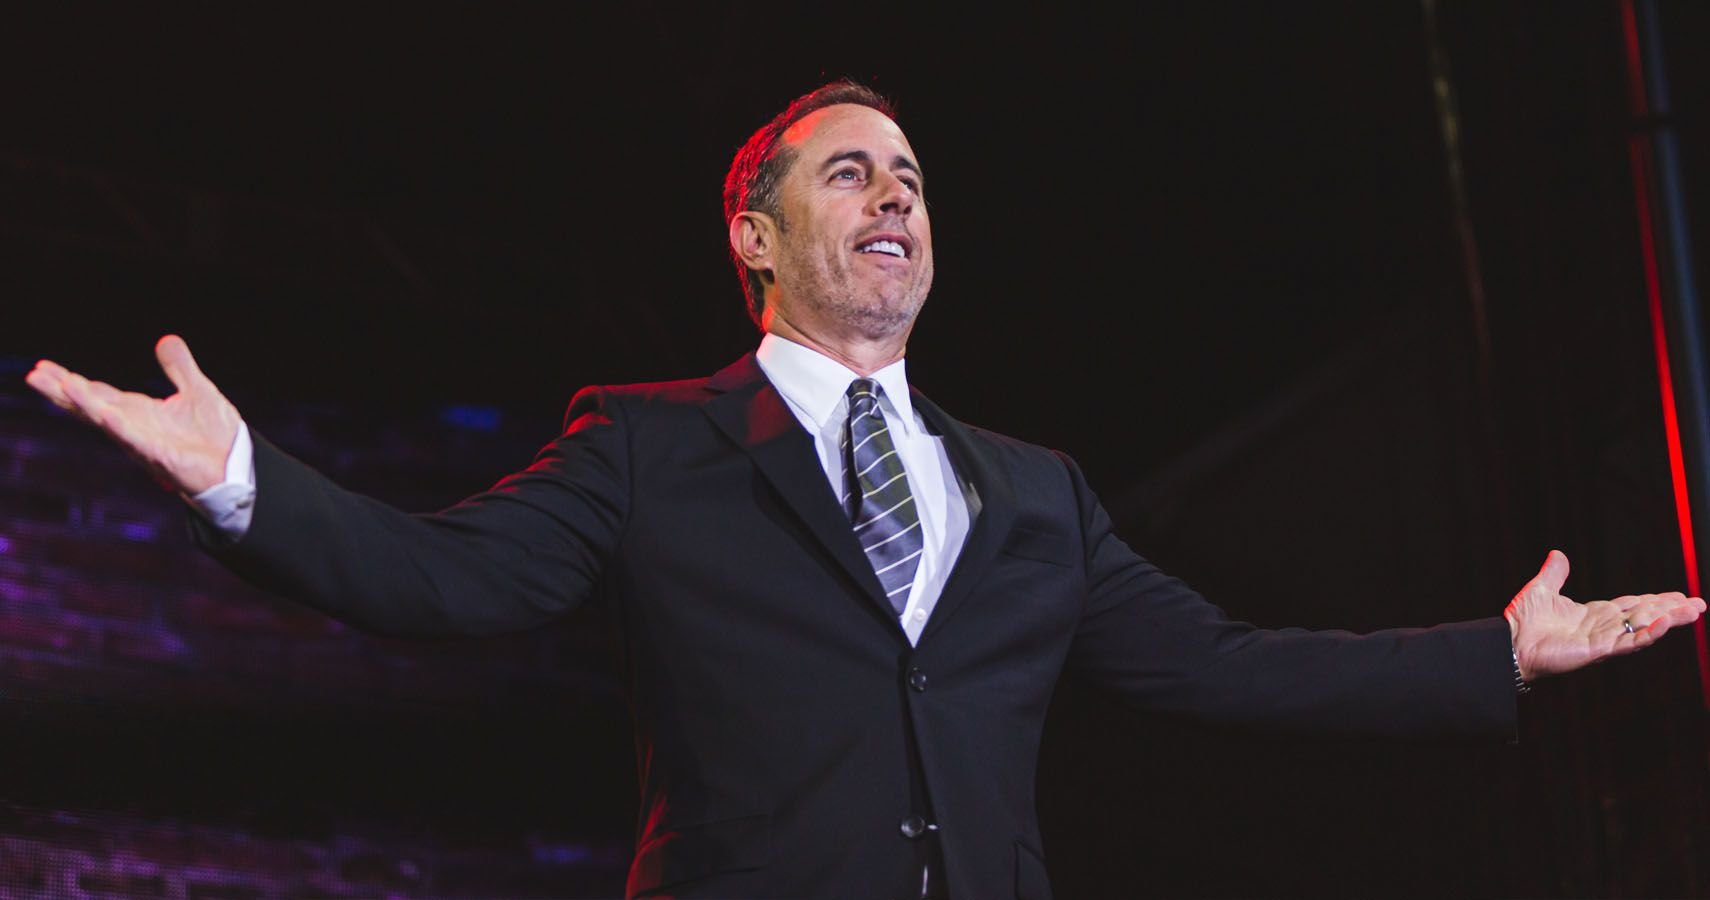 The Richest Comedian In The World: An Inside Look At Jerry Seinfeld's $950 Million